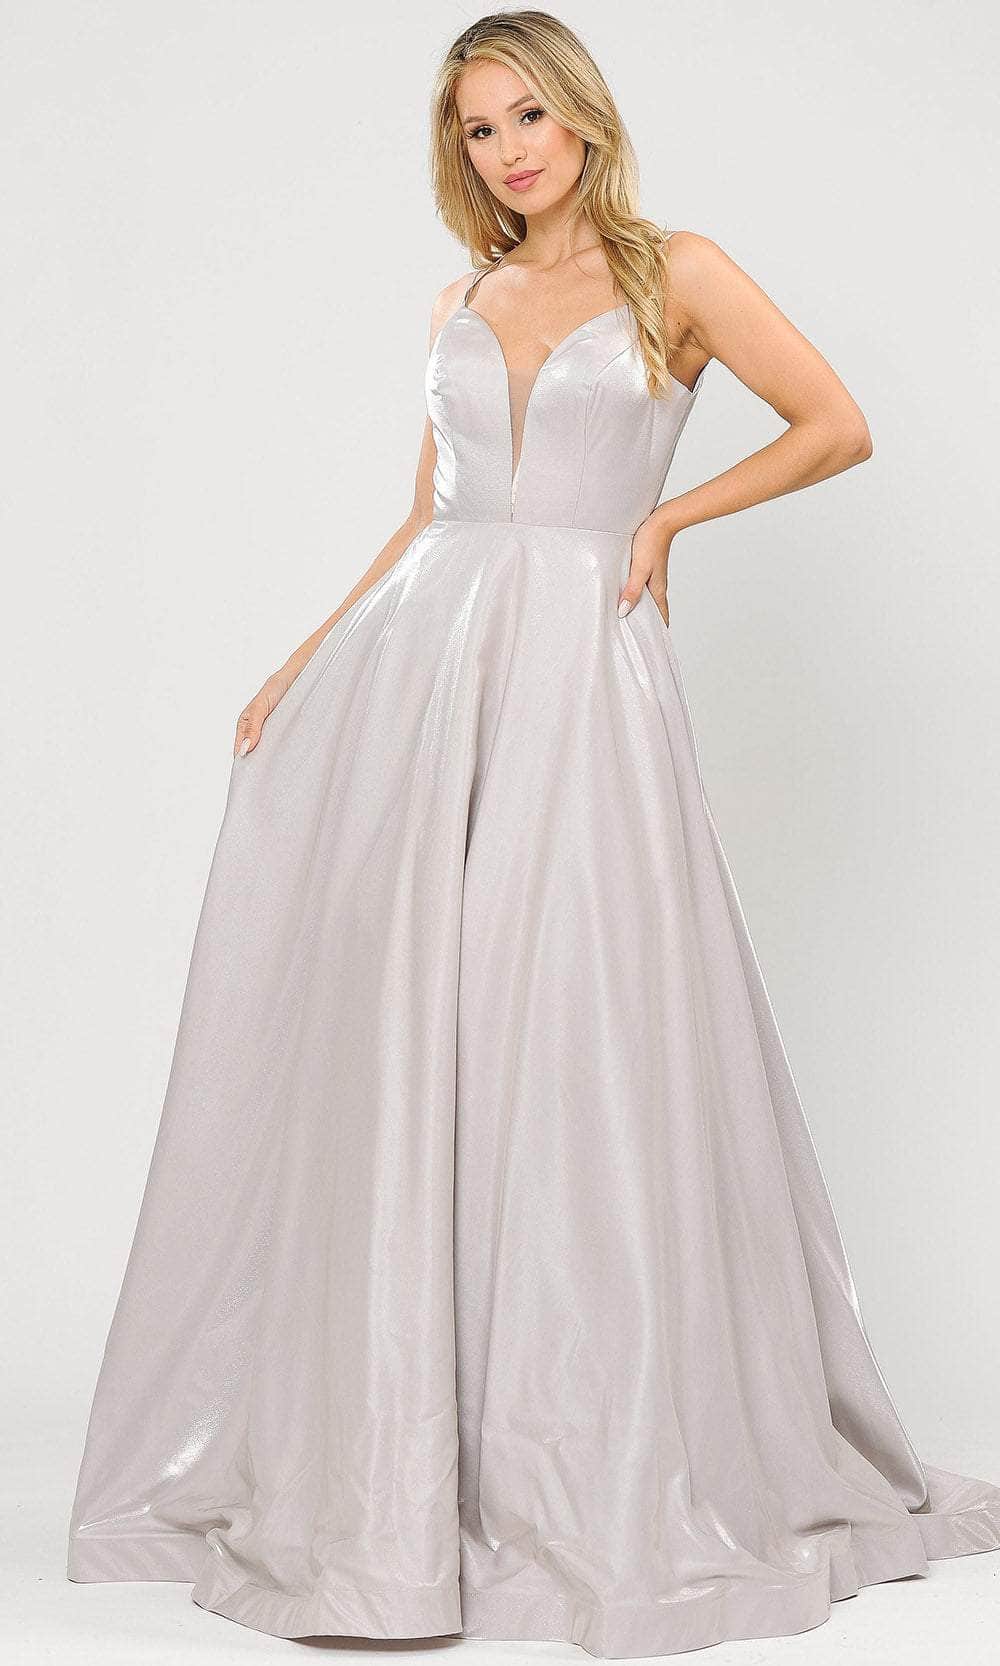 Image of Poly USA 8644 - Deep V-Neck Shimmer Satin Gown